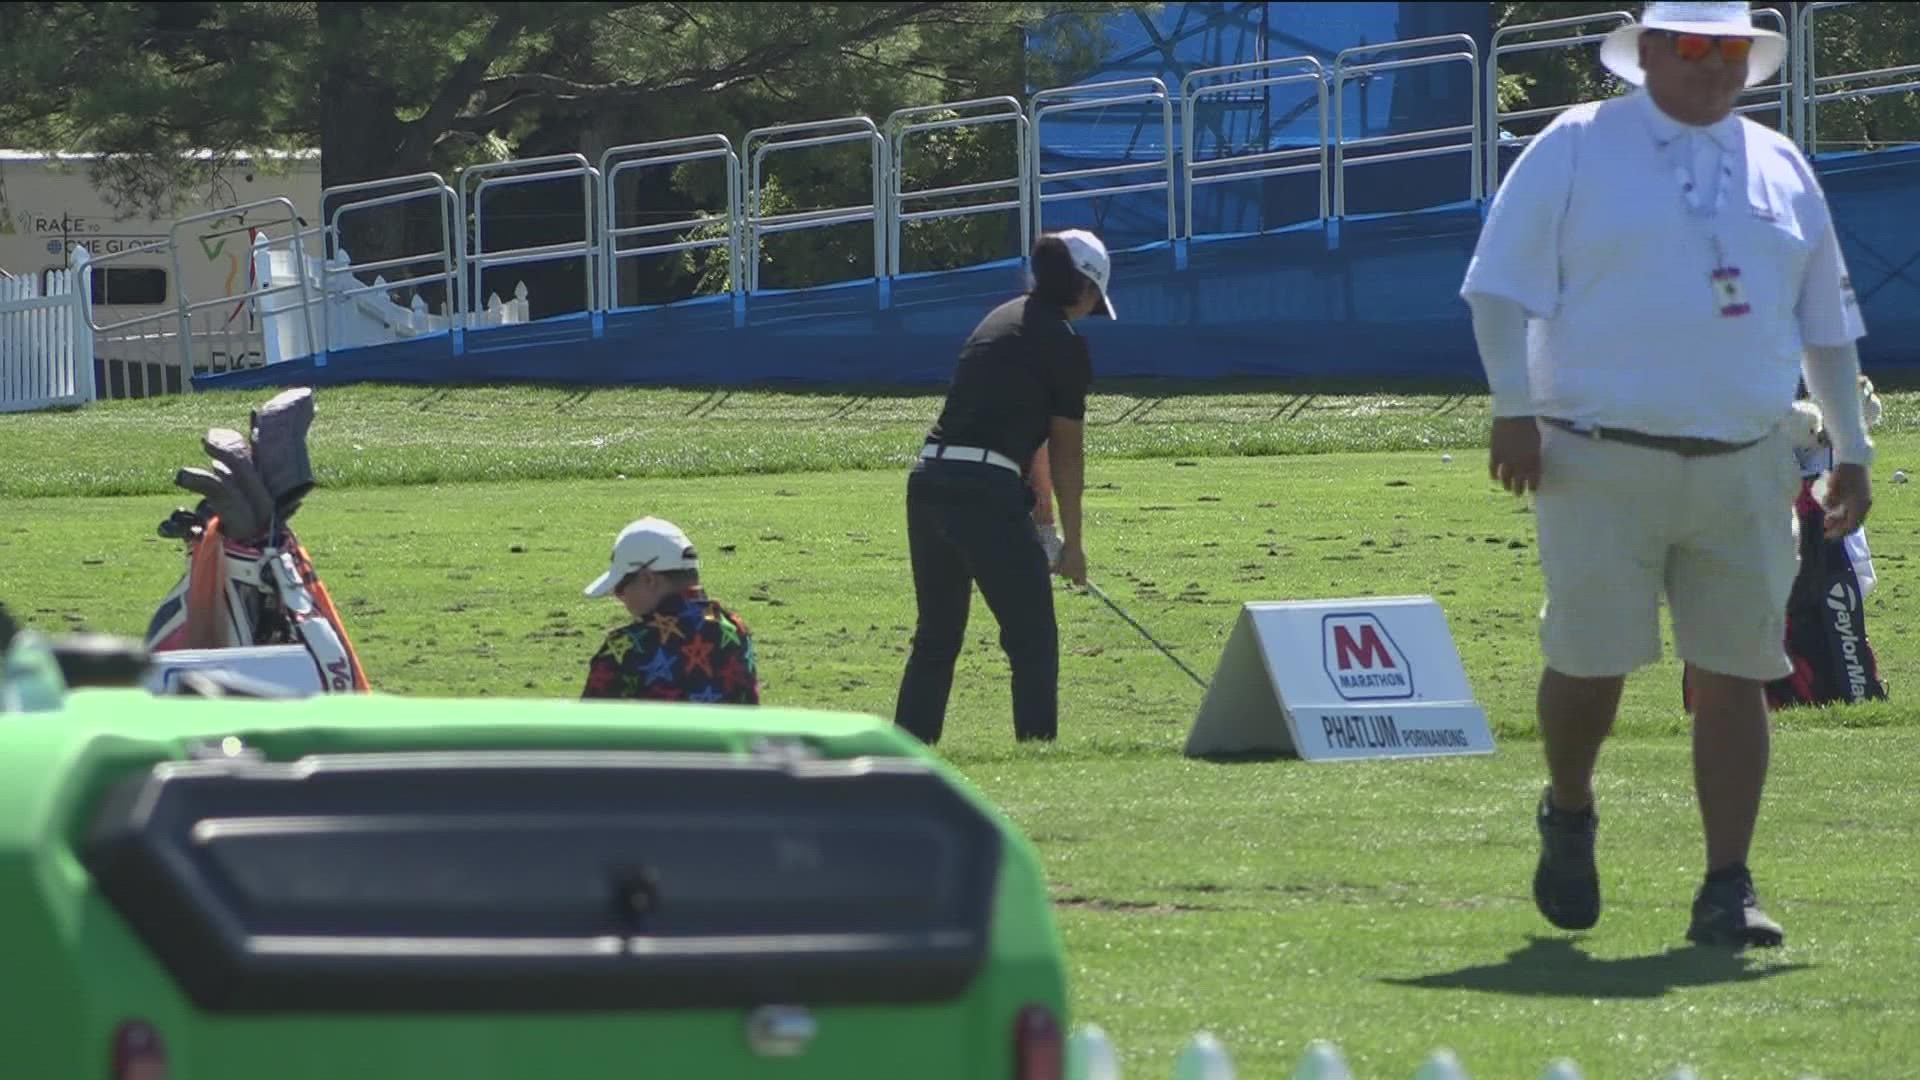 The Dana Open LPGA Classic not only draws top golf talent, but also raises money for local charities.